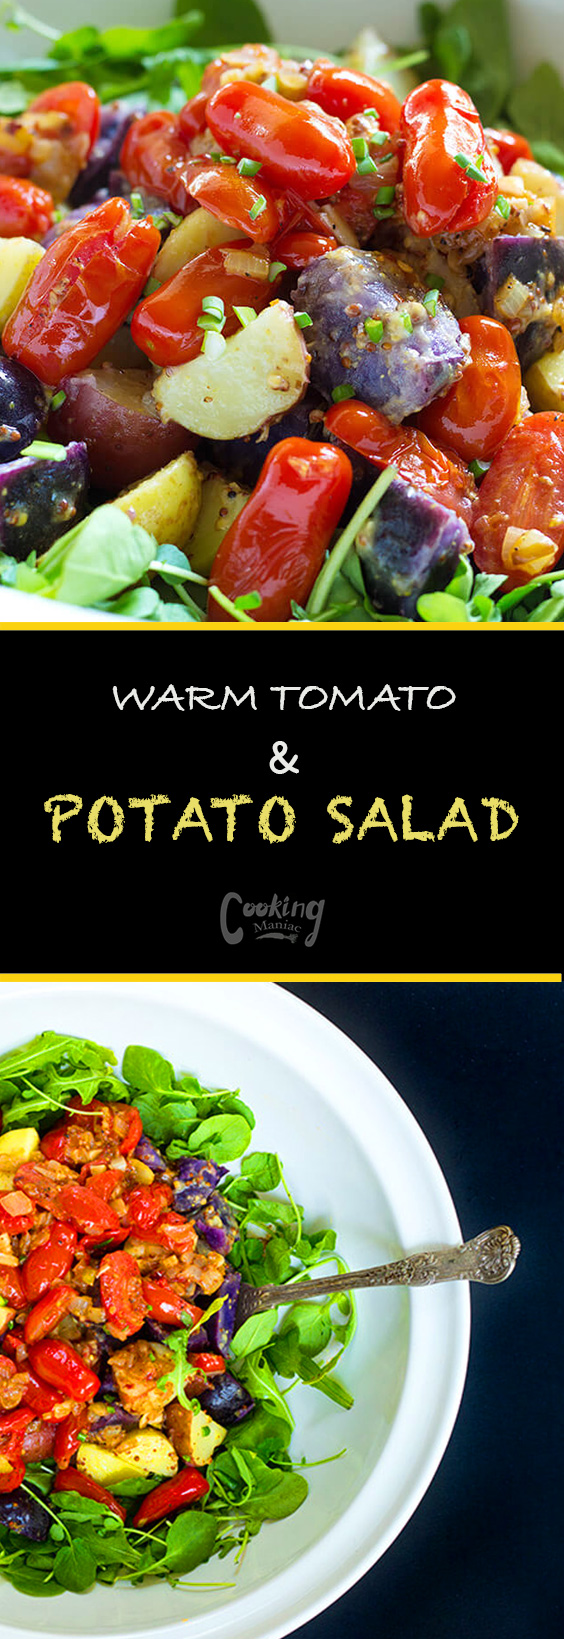 Warm tomato and potato salad is one of my favorite salads of all time. Vegetables are generously tossed in a mustard vinaigrette and served over a mix salad.